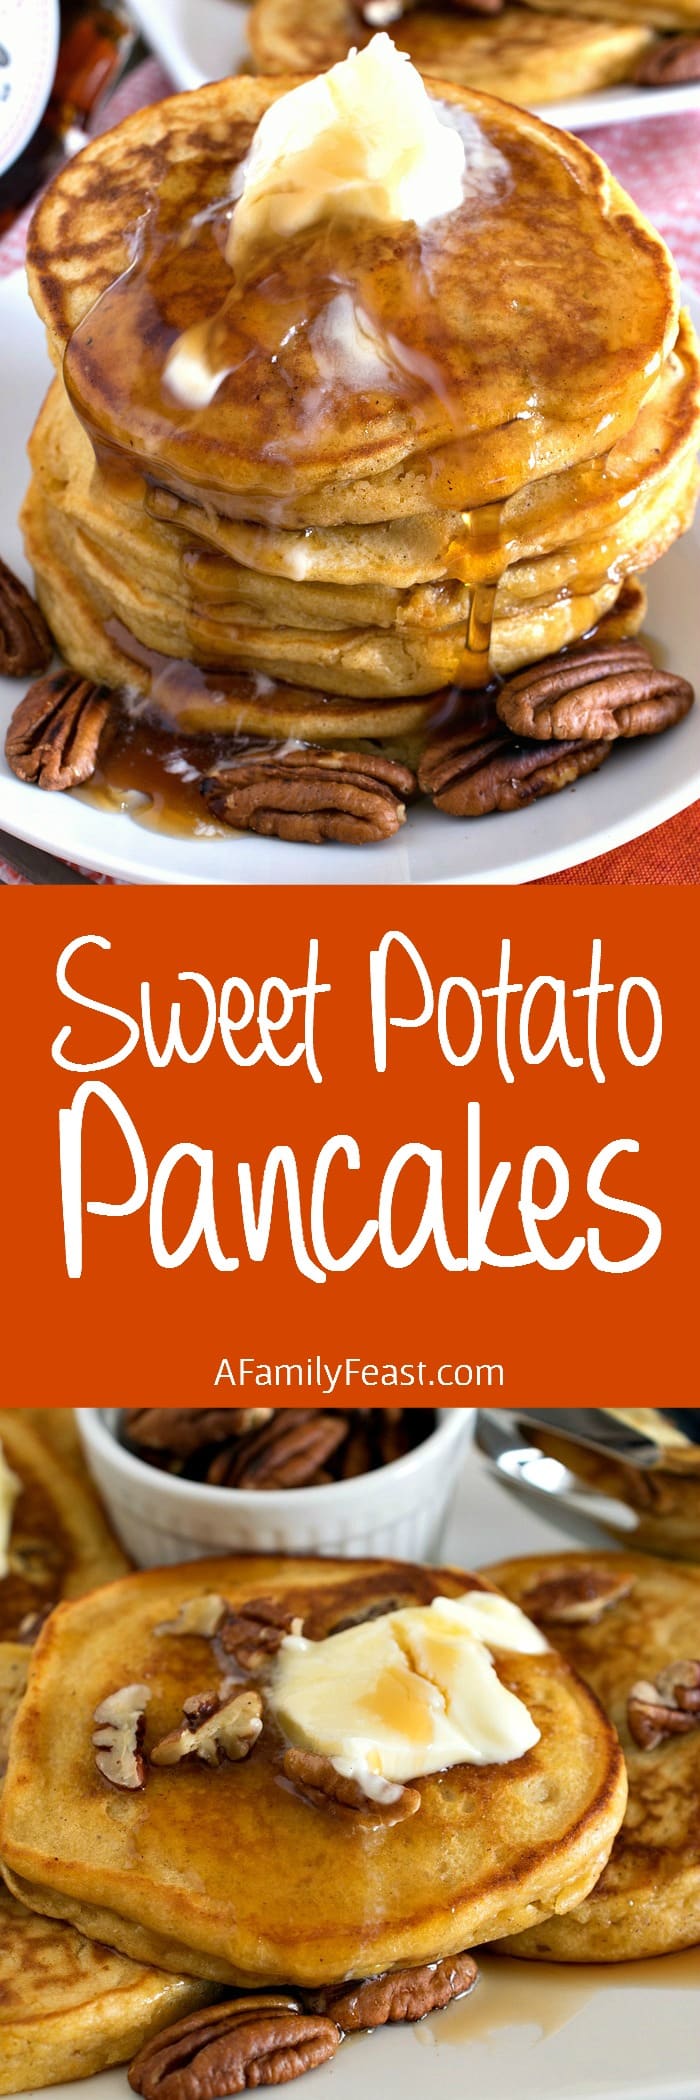 Sweet Potato Pancakes - Made from leftover sweet potato casserole, these delicious pancakes are some of the best pancakes you will ever eat!